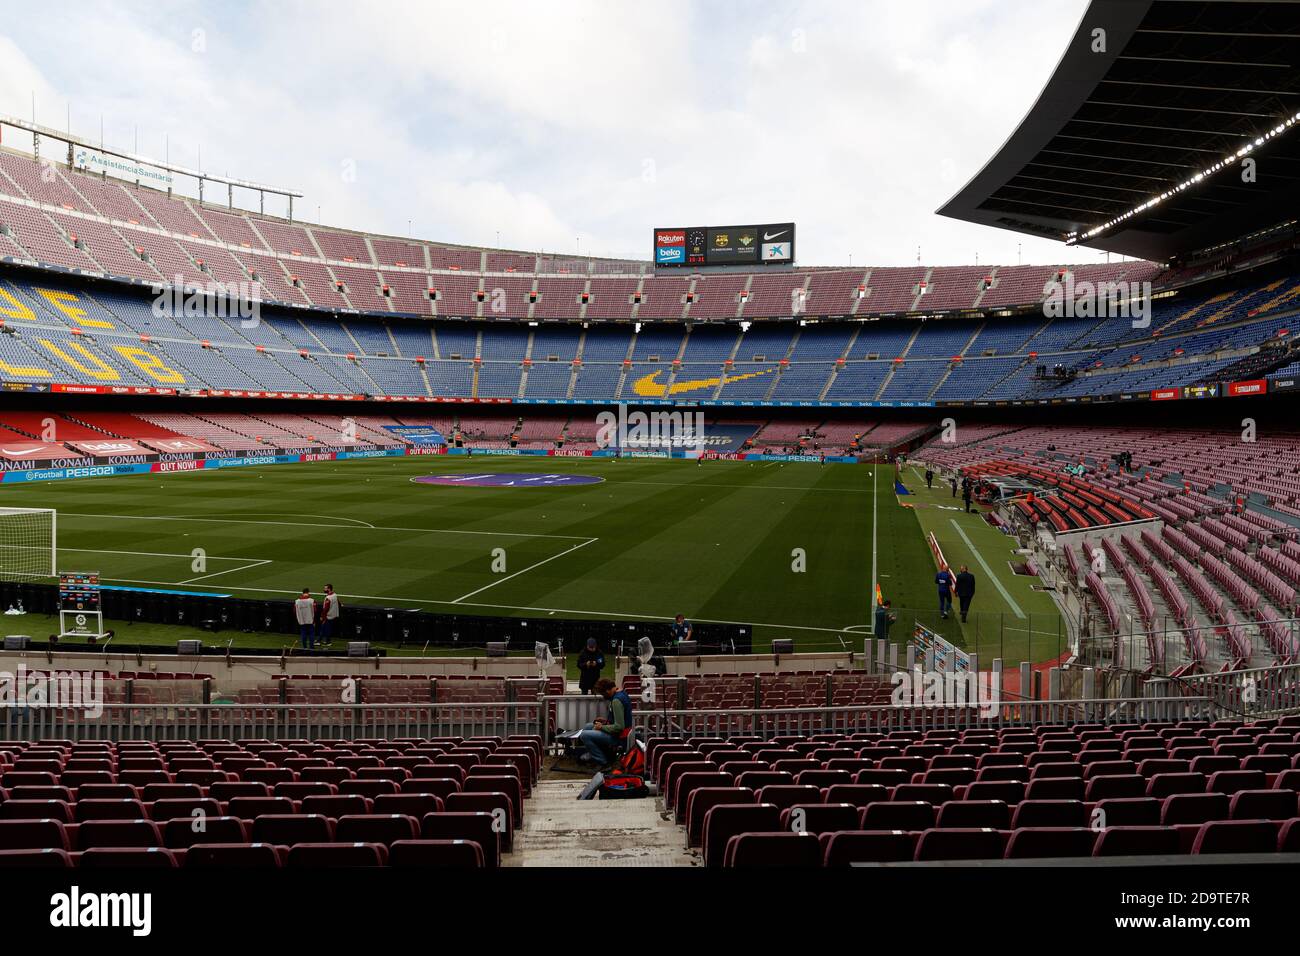 Barcelona, Spain. 07th Nov, 2020. Camp Nou during the Liga Santander match between FC Barcelona and Real Betis Balompie at Camp Nou in Barcelona, Spain. Credit: Dax Images/Alamy Live News Stock Photo